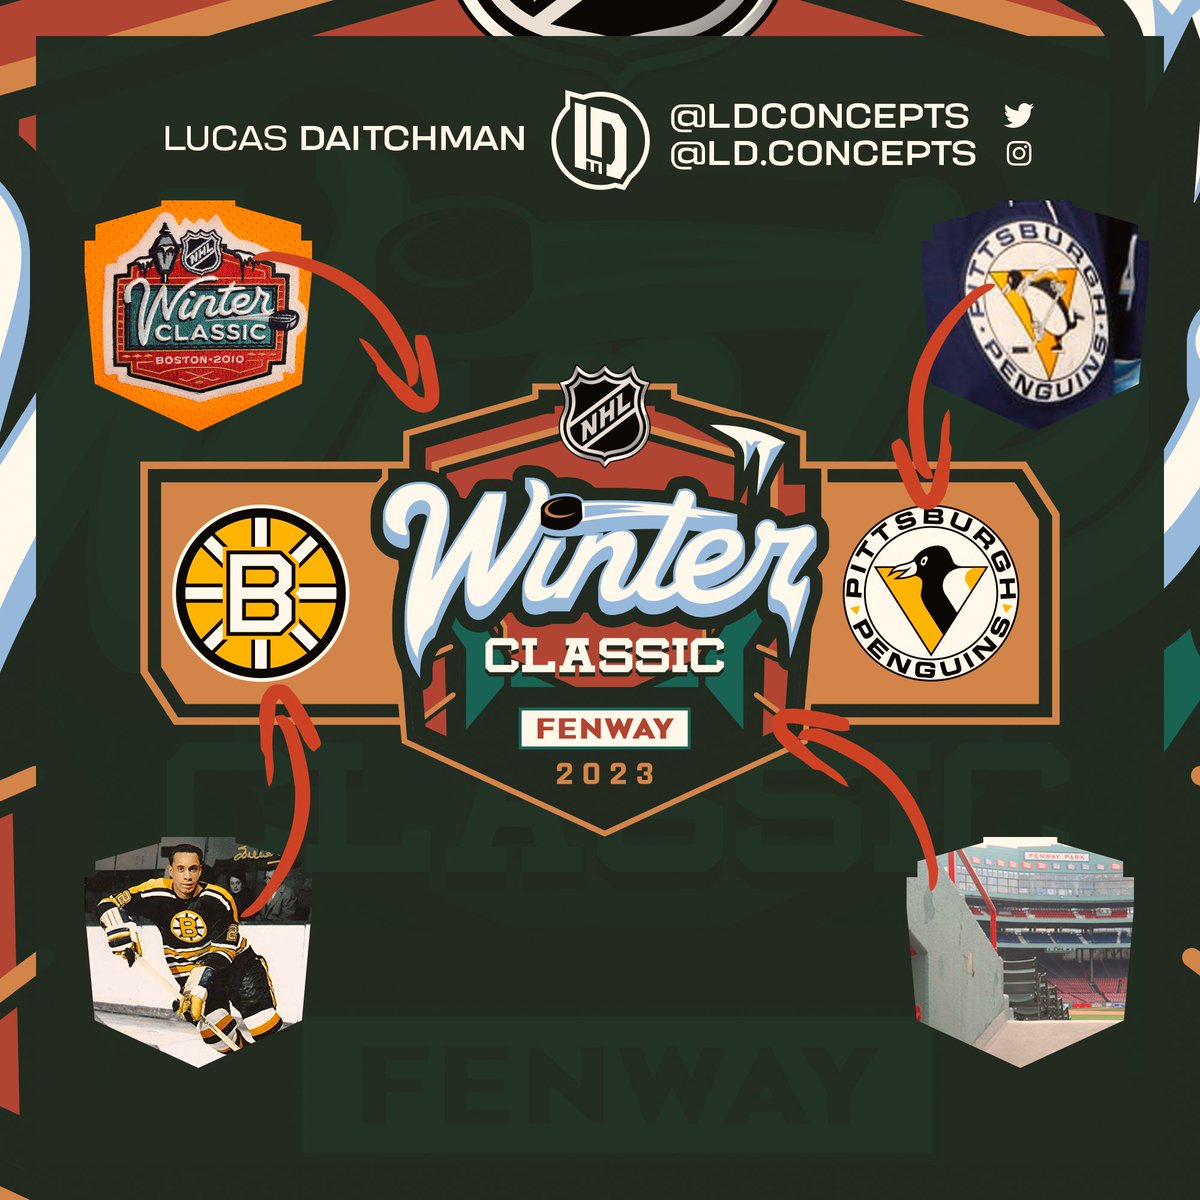 Bruins, Penguins Reveal Logos for 2023 Winter Classic at Fenway